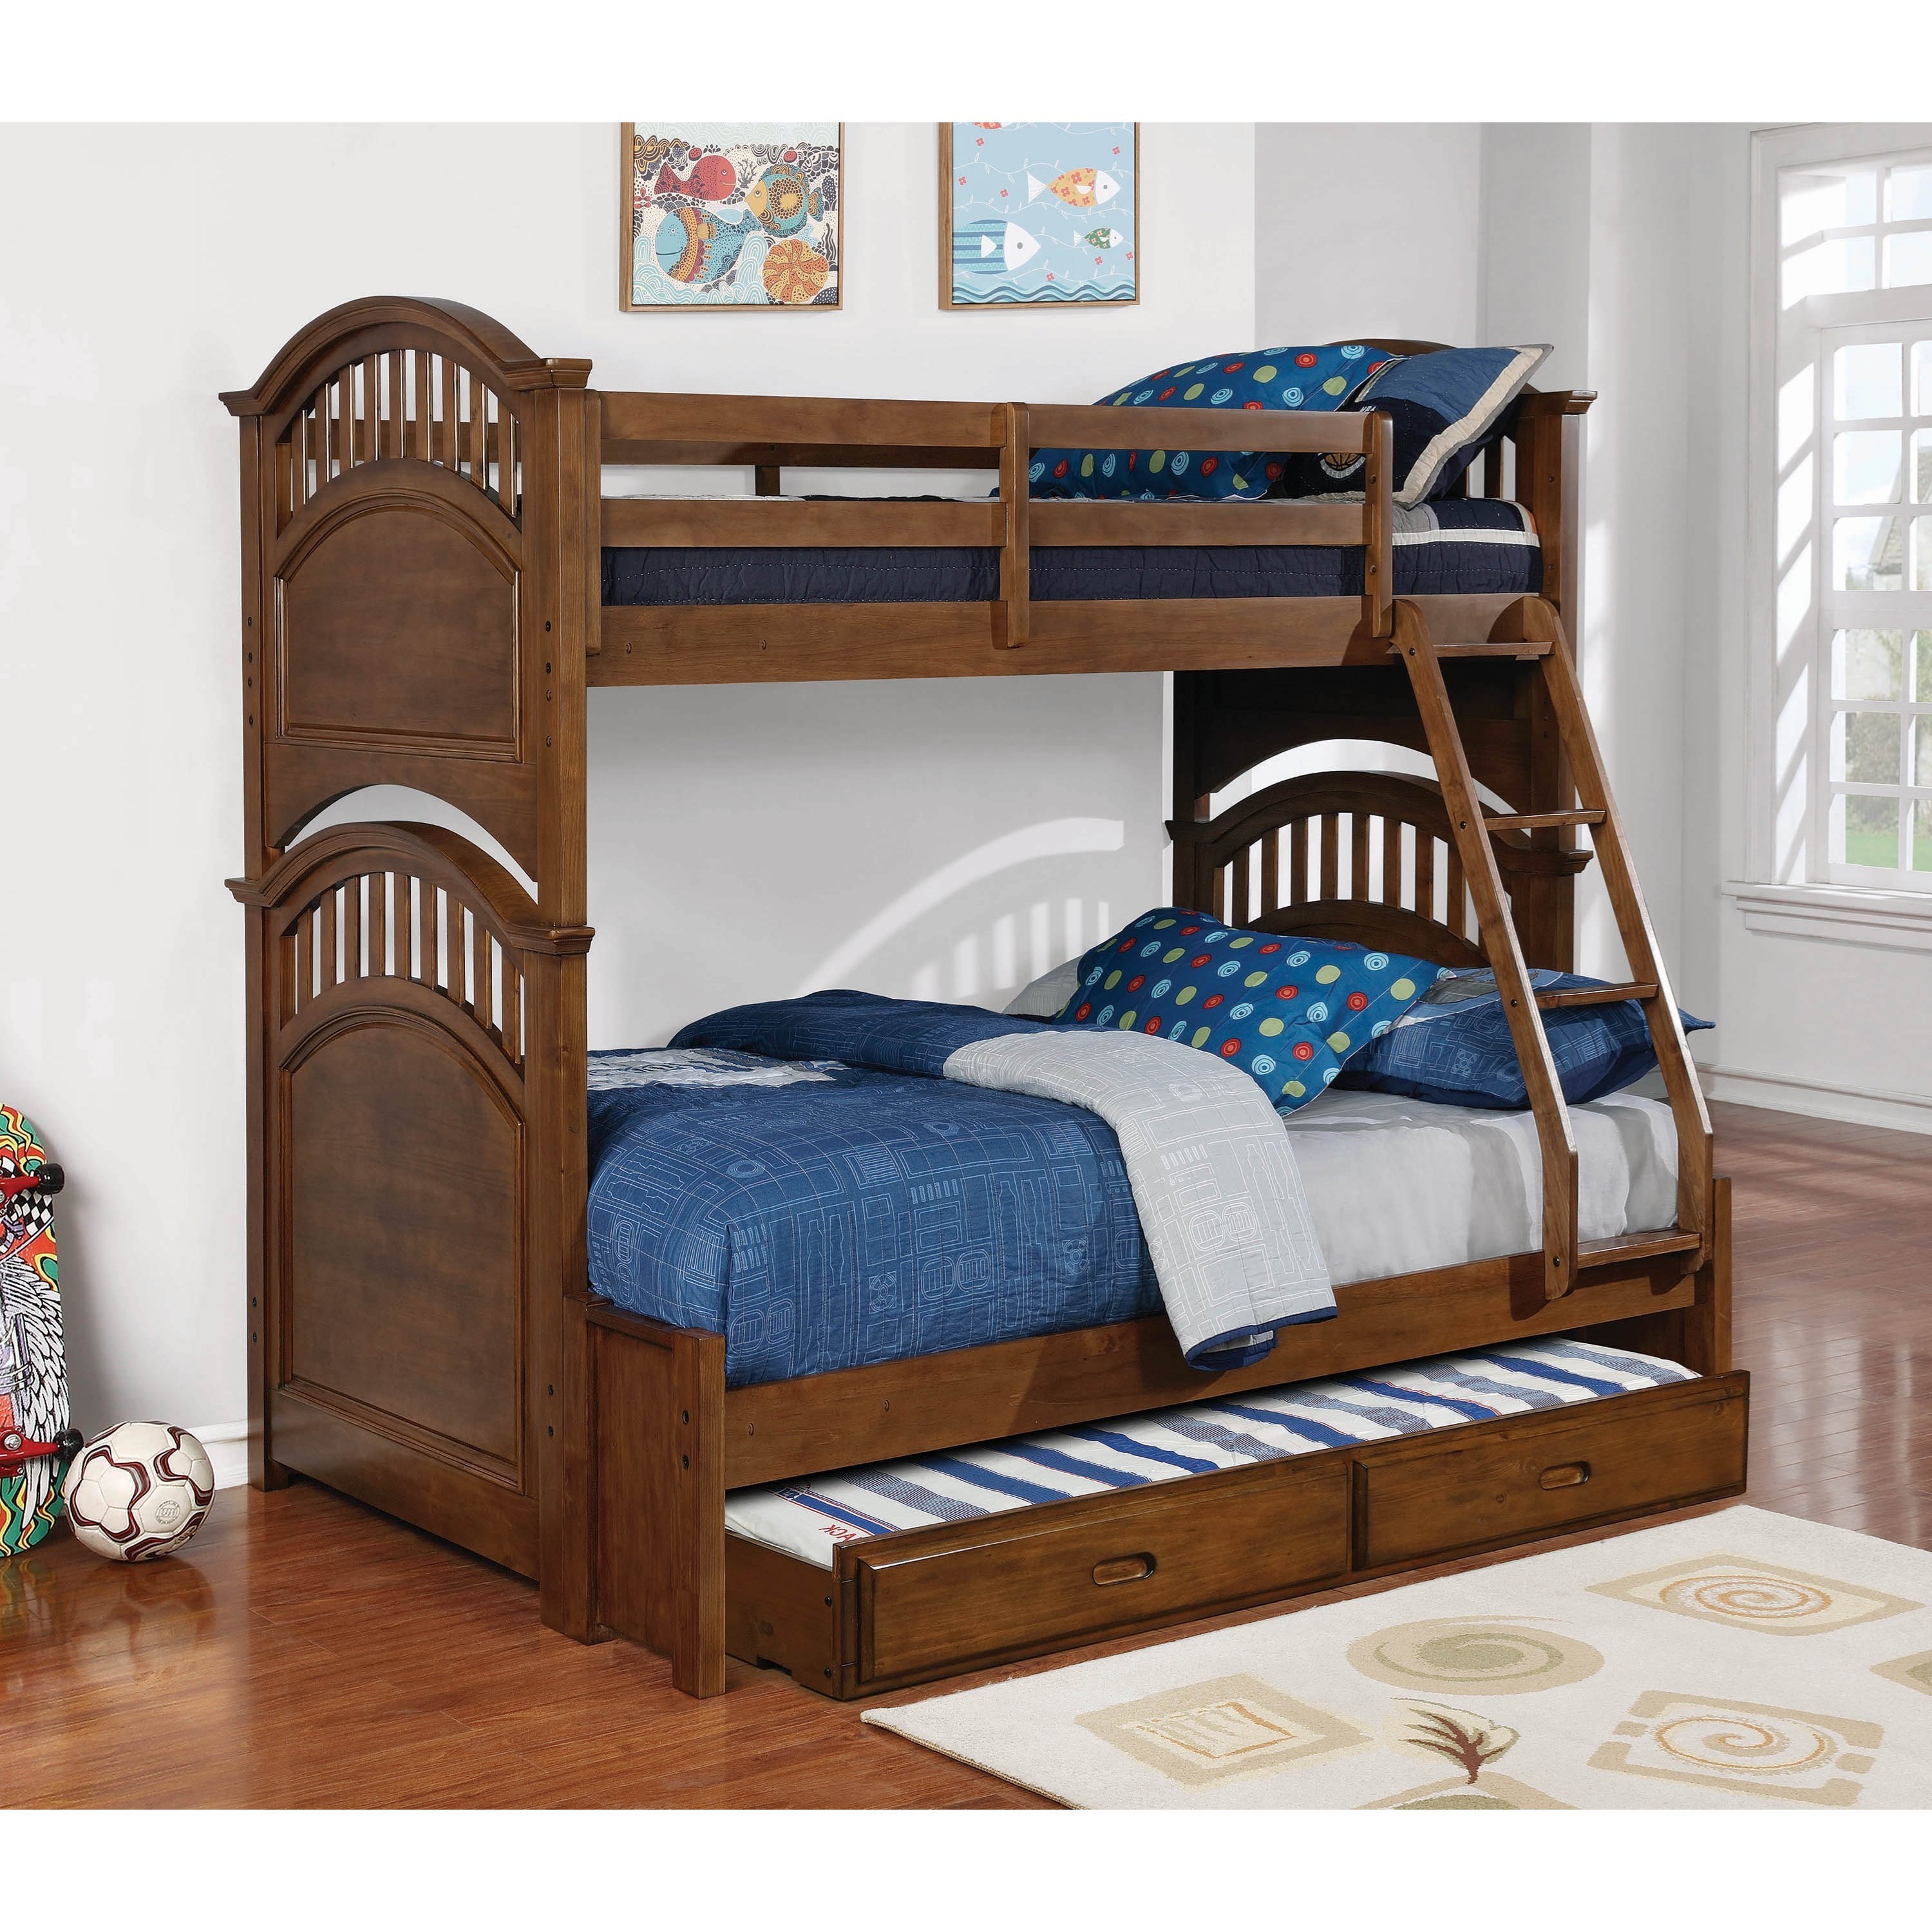 wooden bunk beds with mattresses